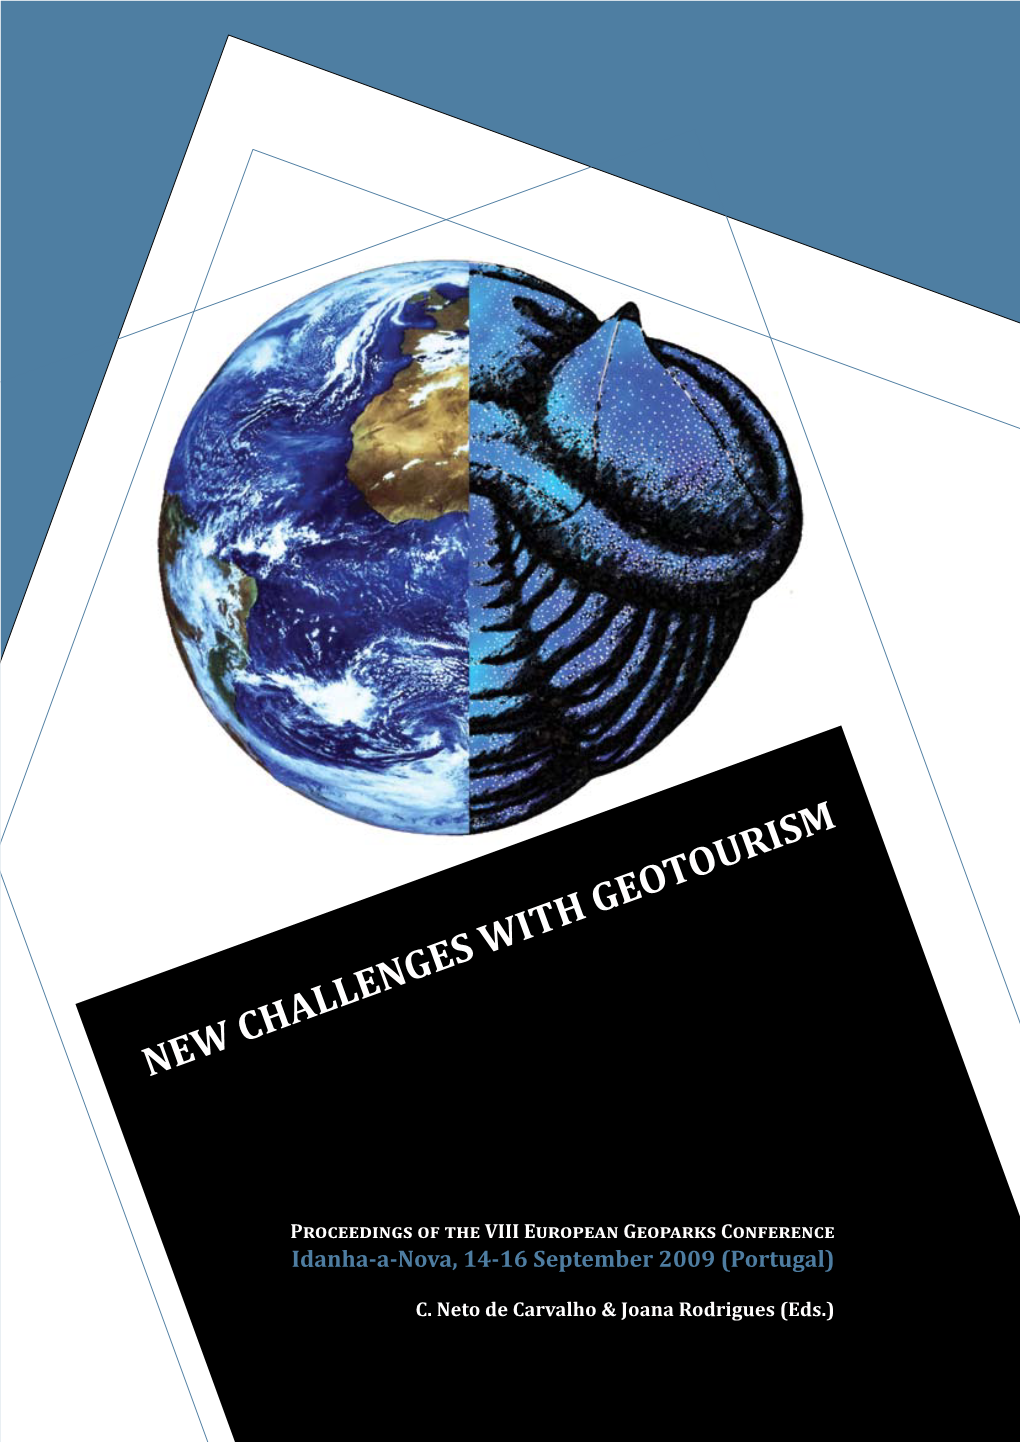 New Challenges with Geotourism